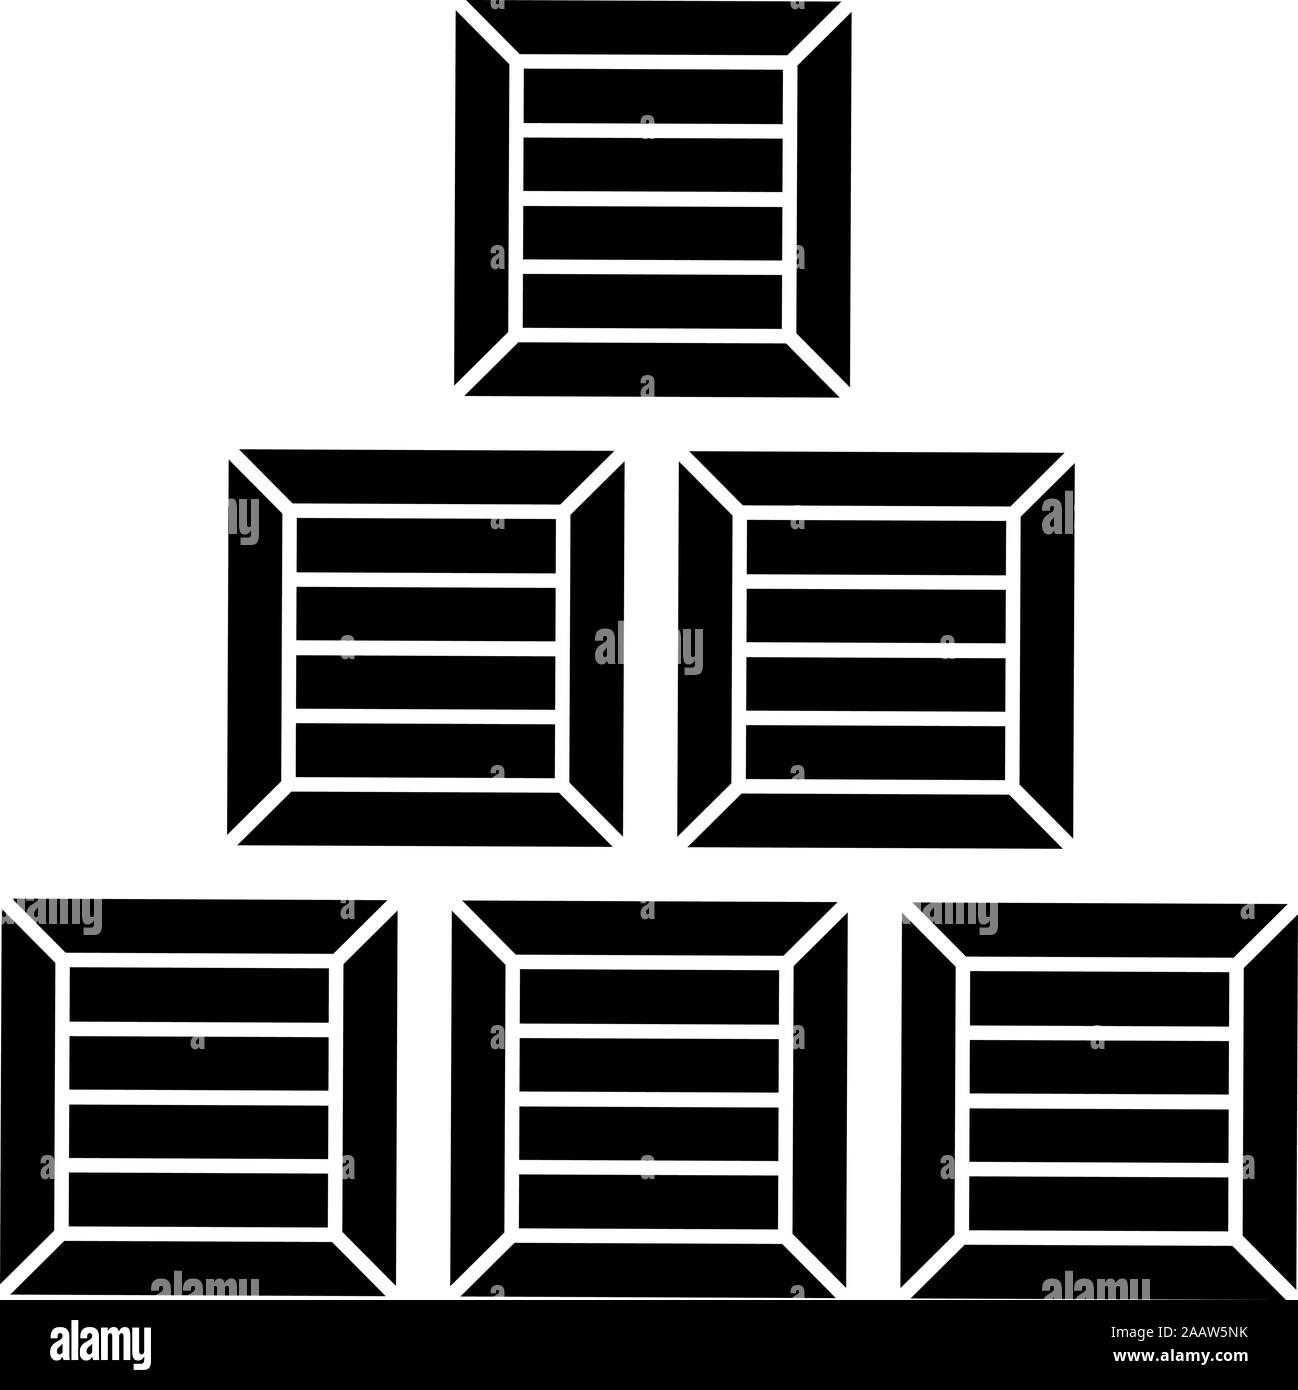 Pyramid crates Wooden boxs Containers icon black color vector illustration flat style simple image Stock Vector